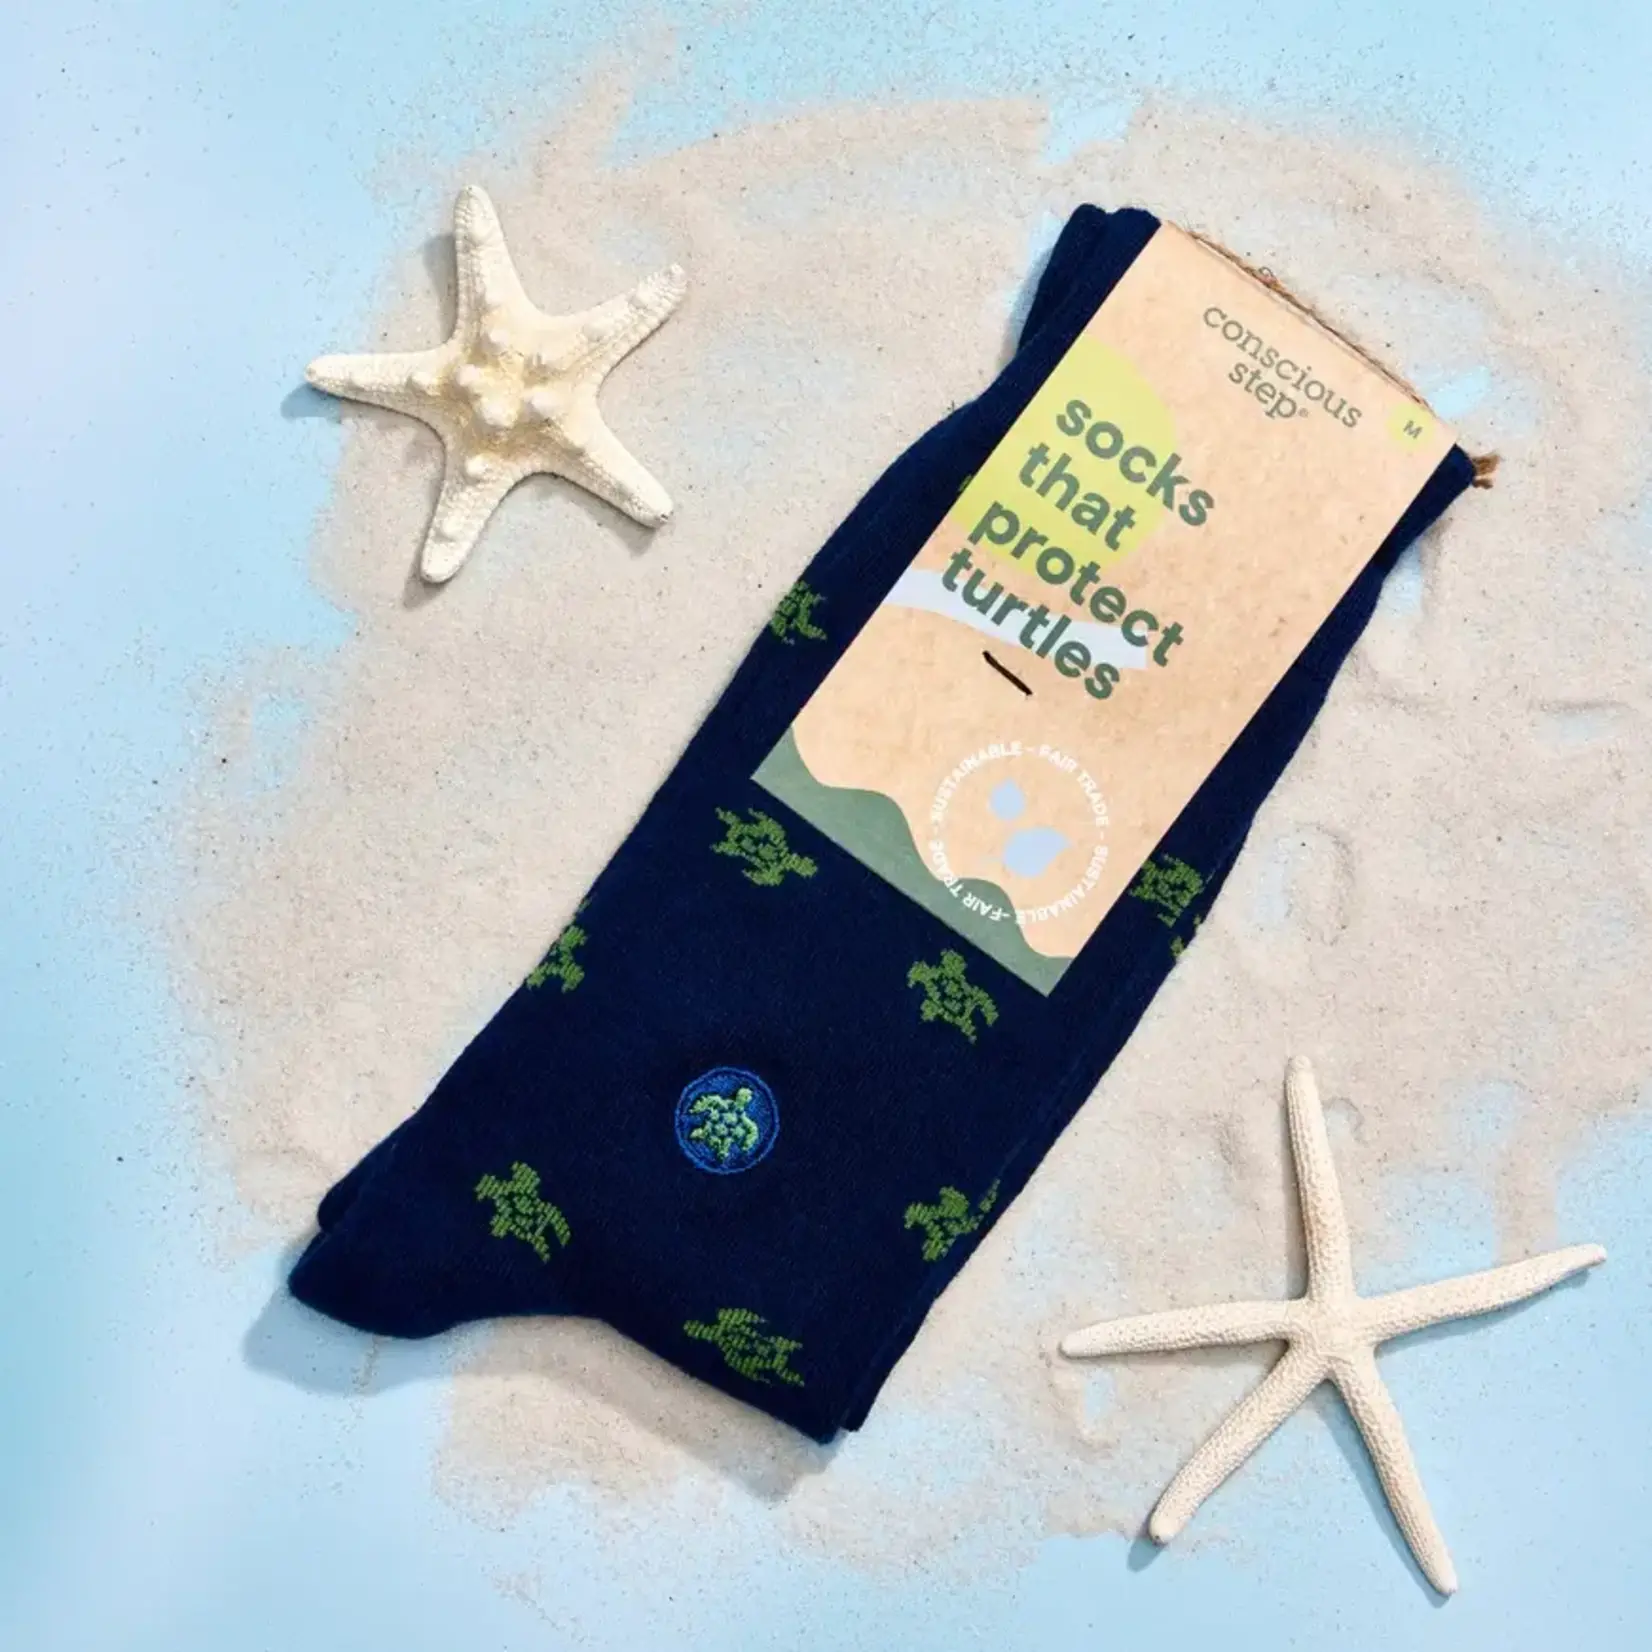 Socks that Protect Turtles (Navy Turtles) | Small